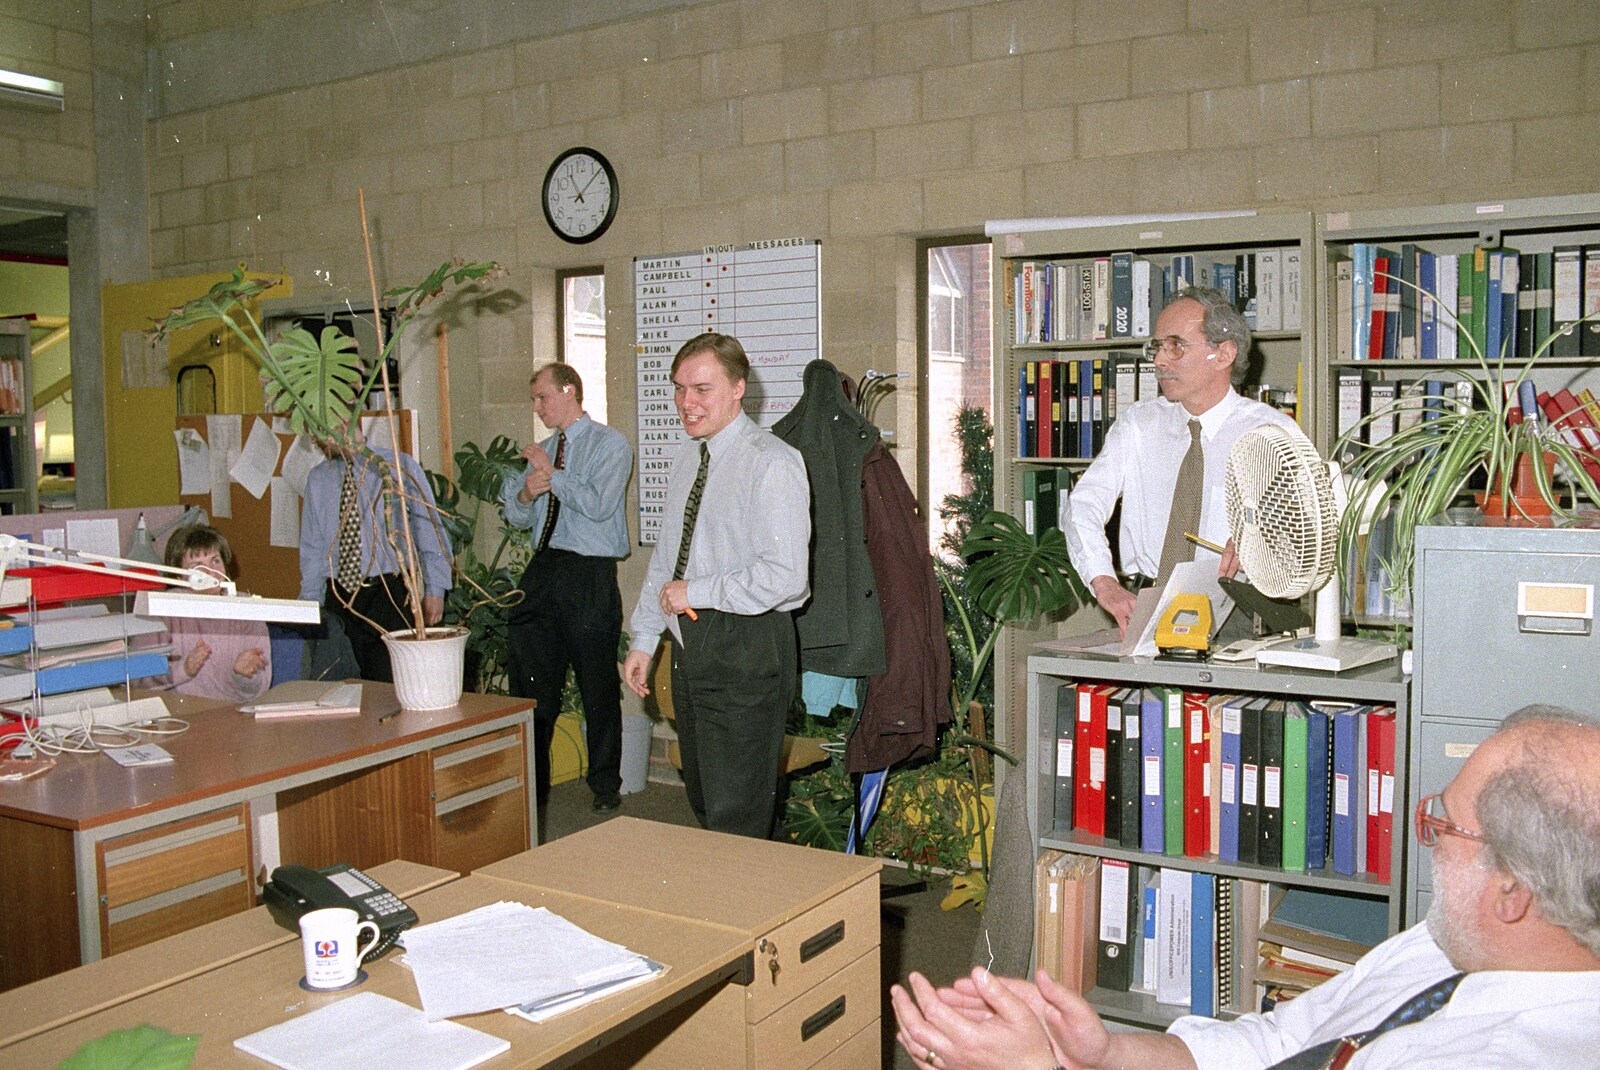 Campbell Leaves CISU, Suffolk County Council, Ipswich, Suffolk - 4th May 1996: Campbell gives some sort of speech as Martin Elsey stands by